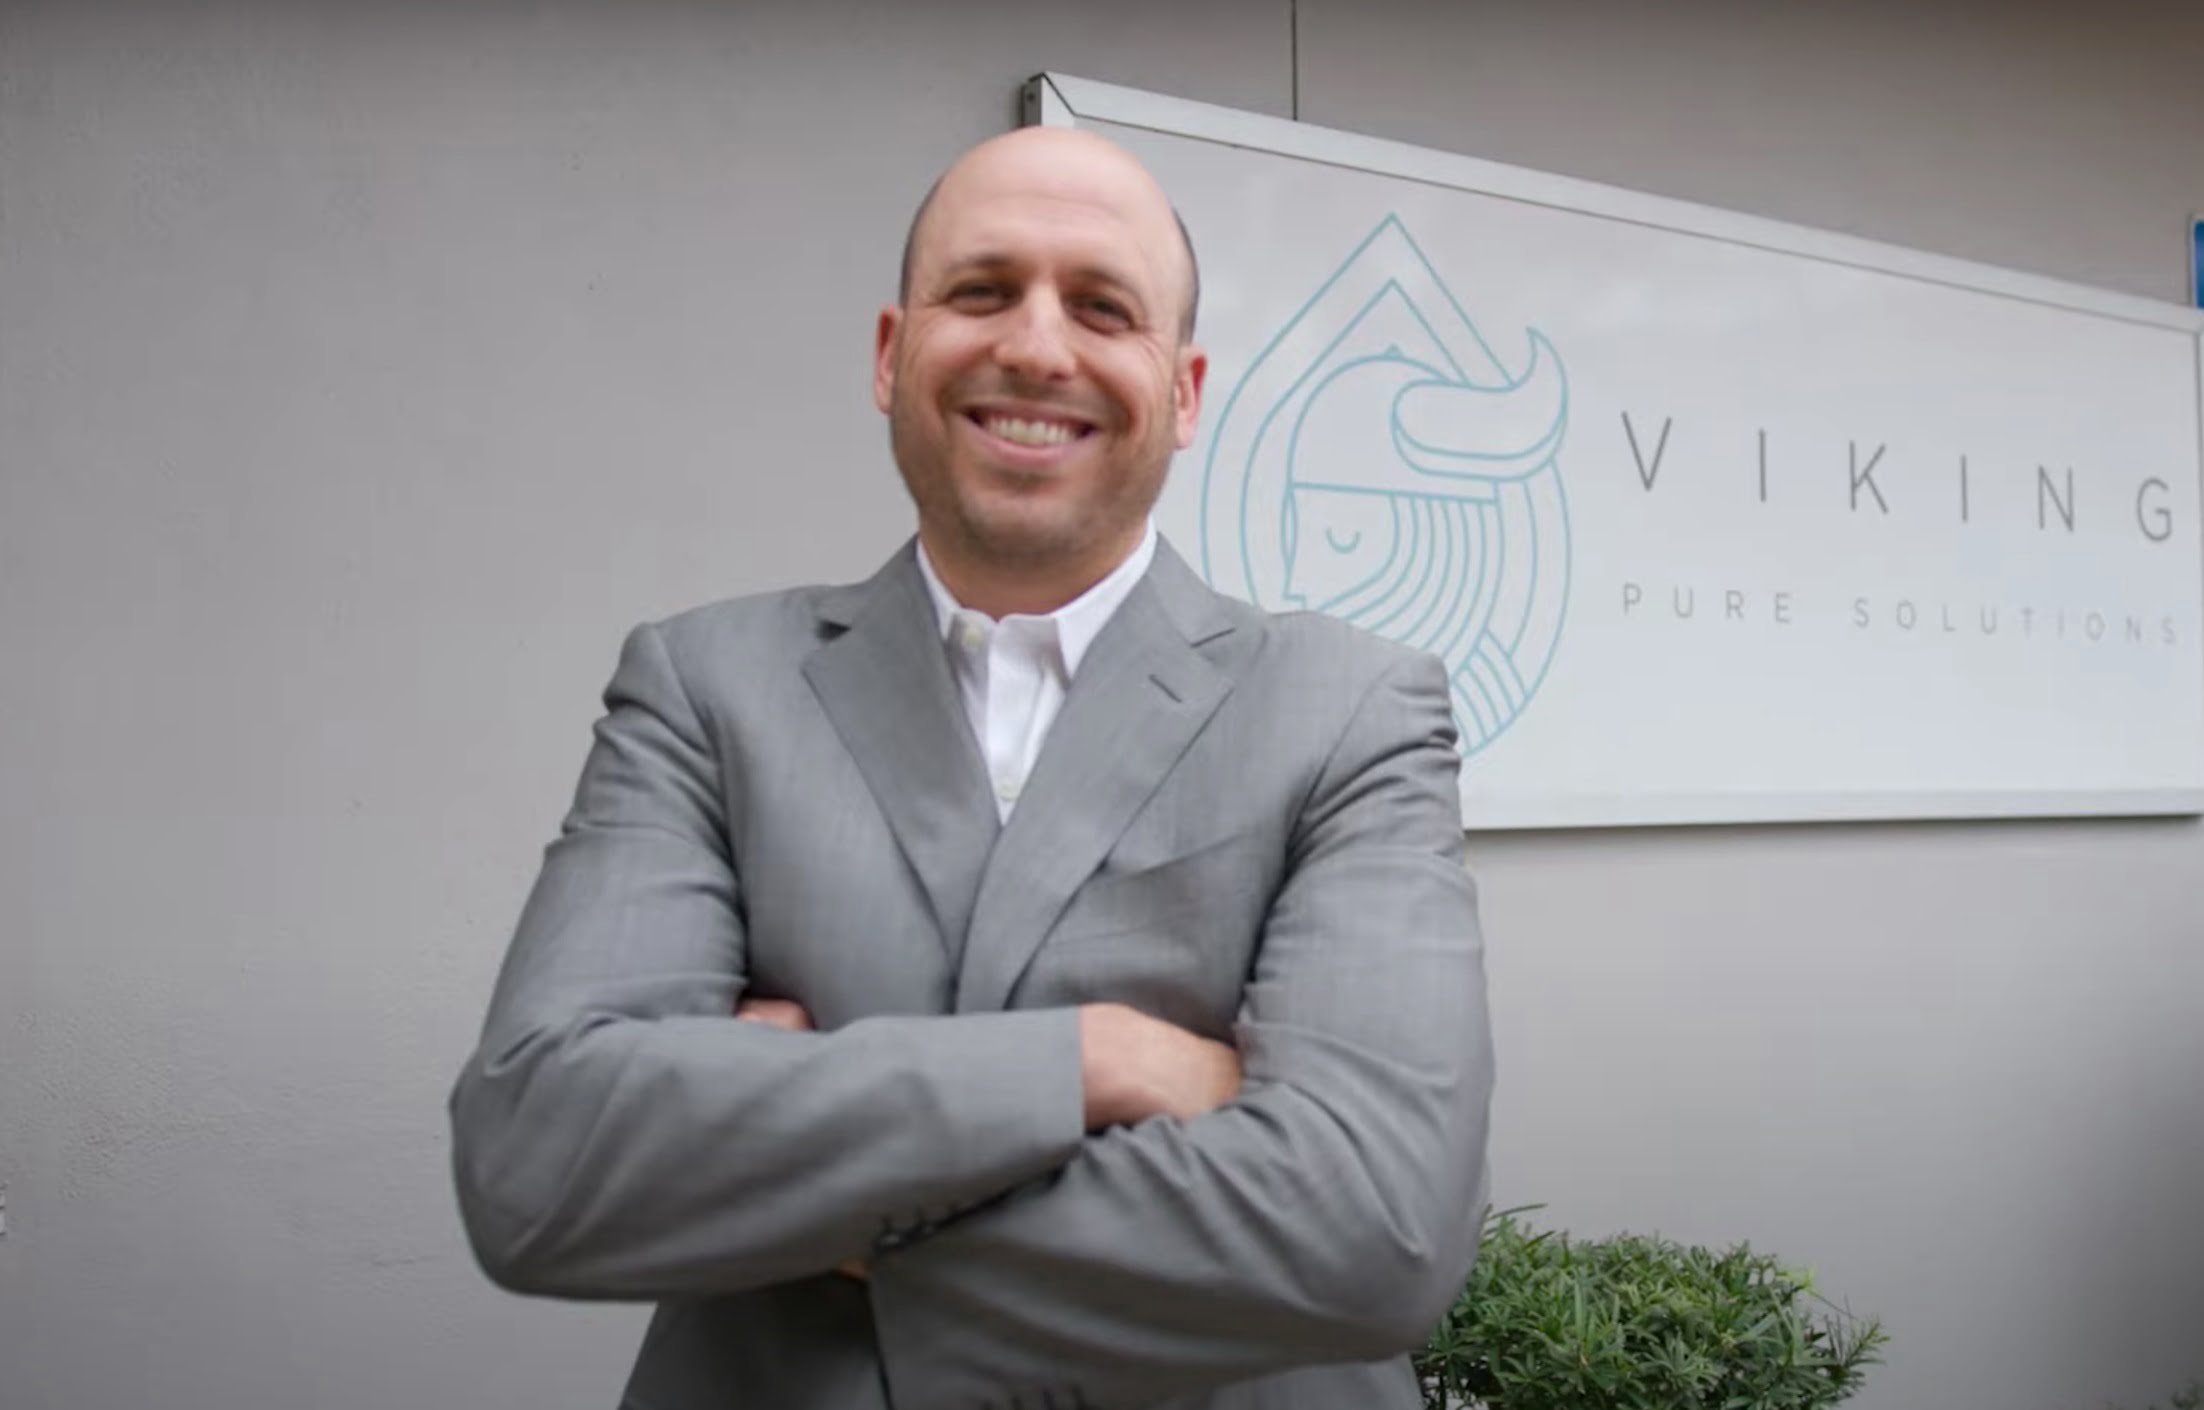 Man smiling in grey suit, with sign behind saying 'Viking"